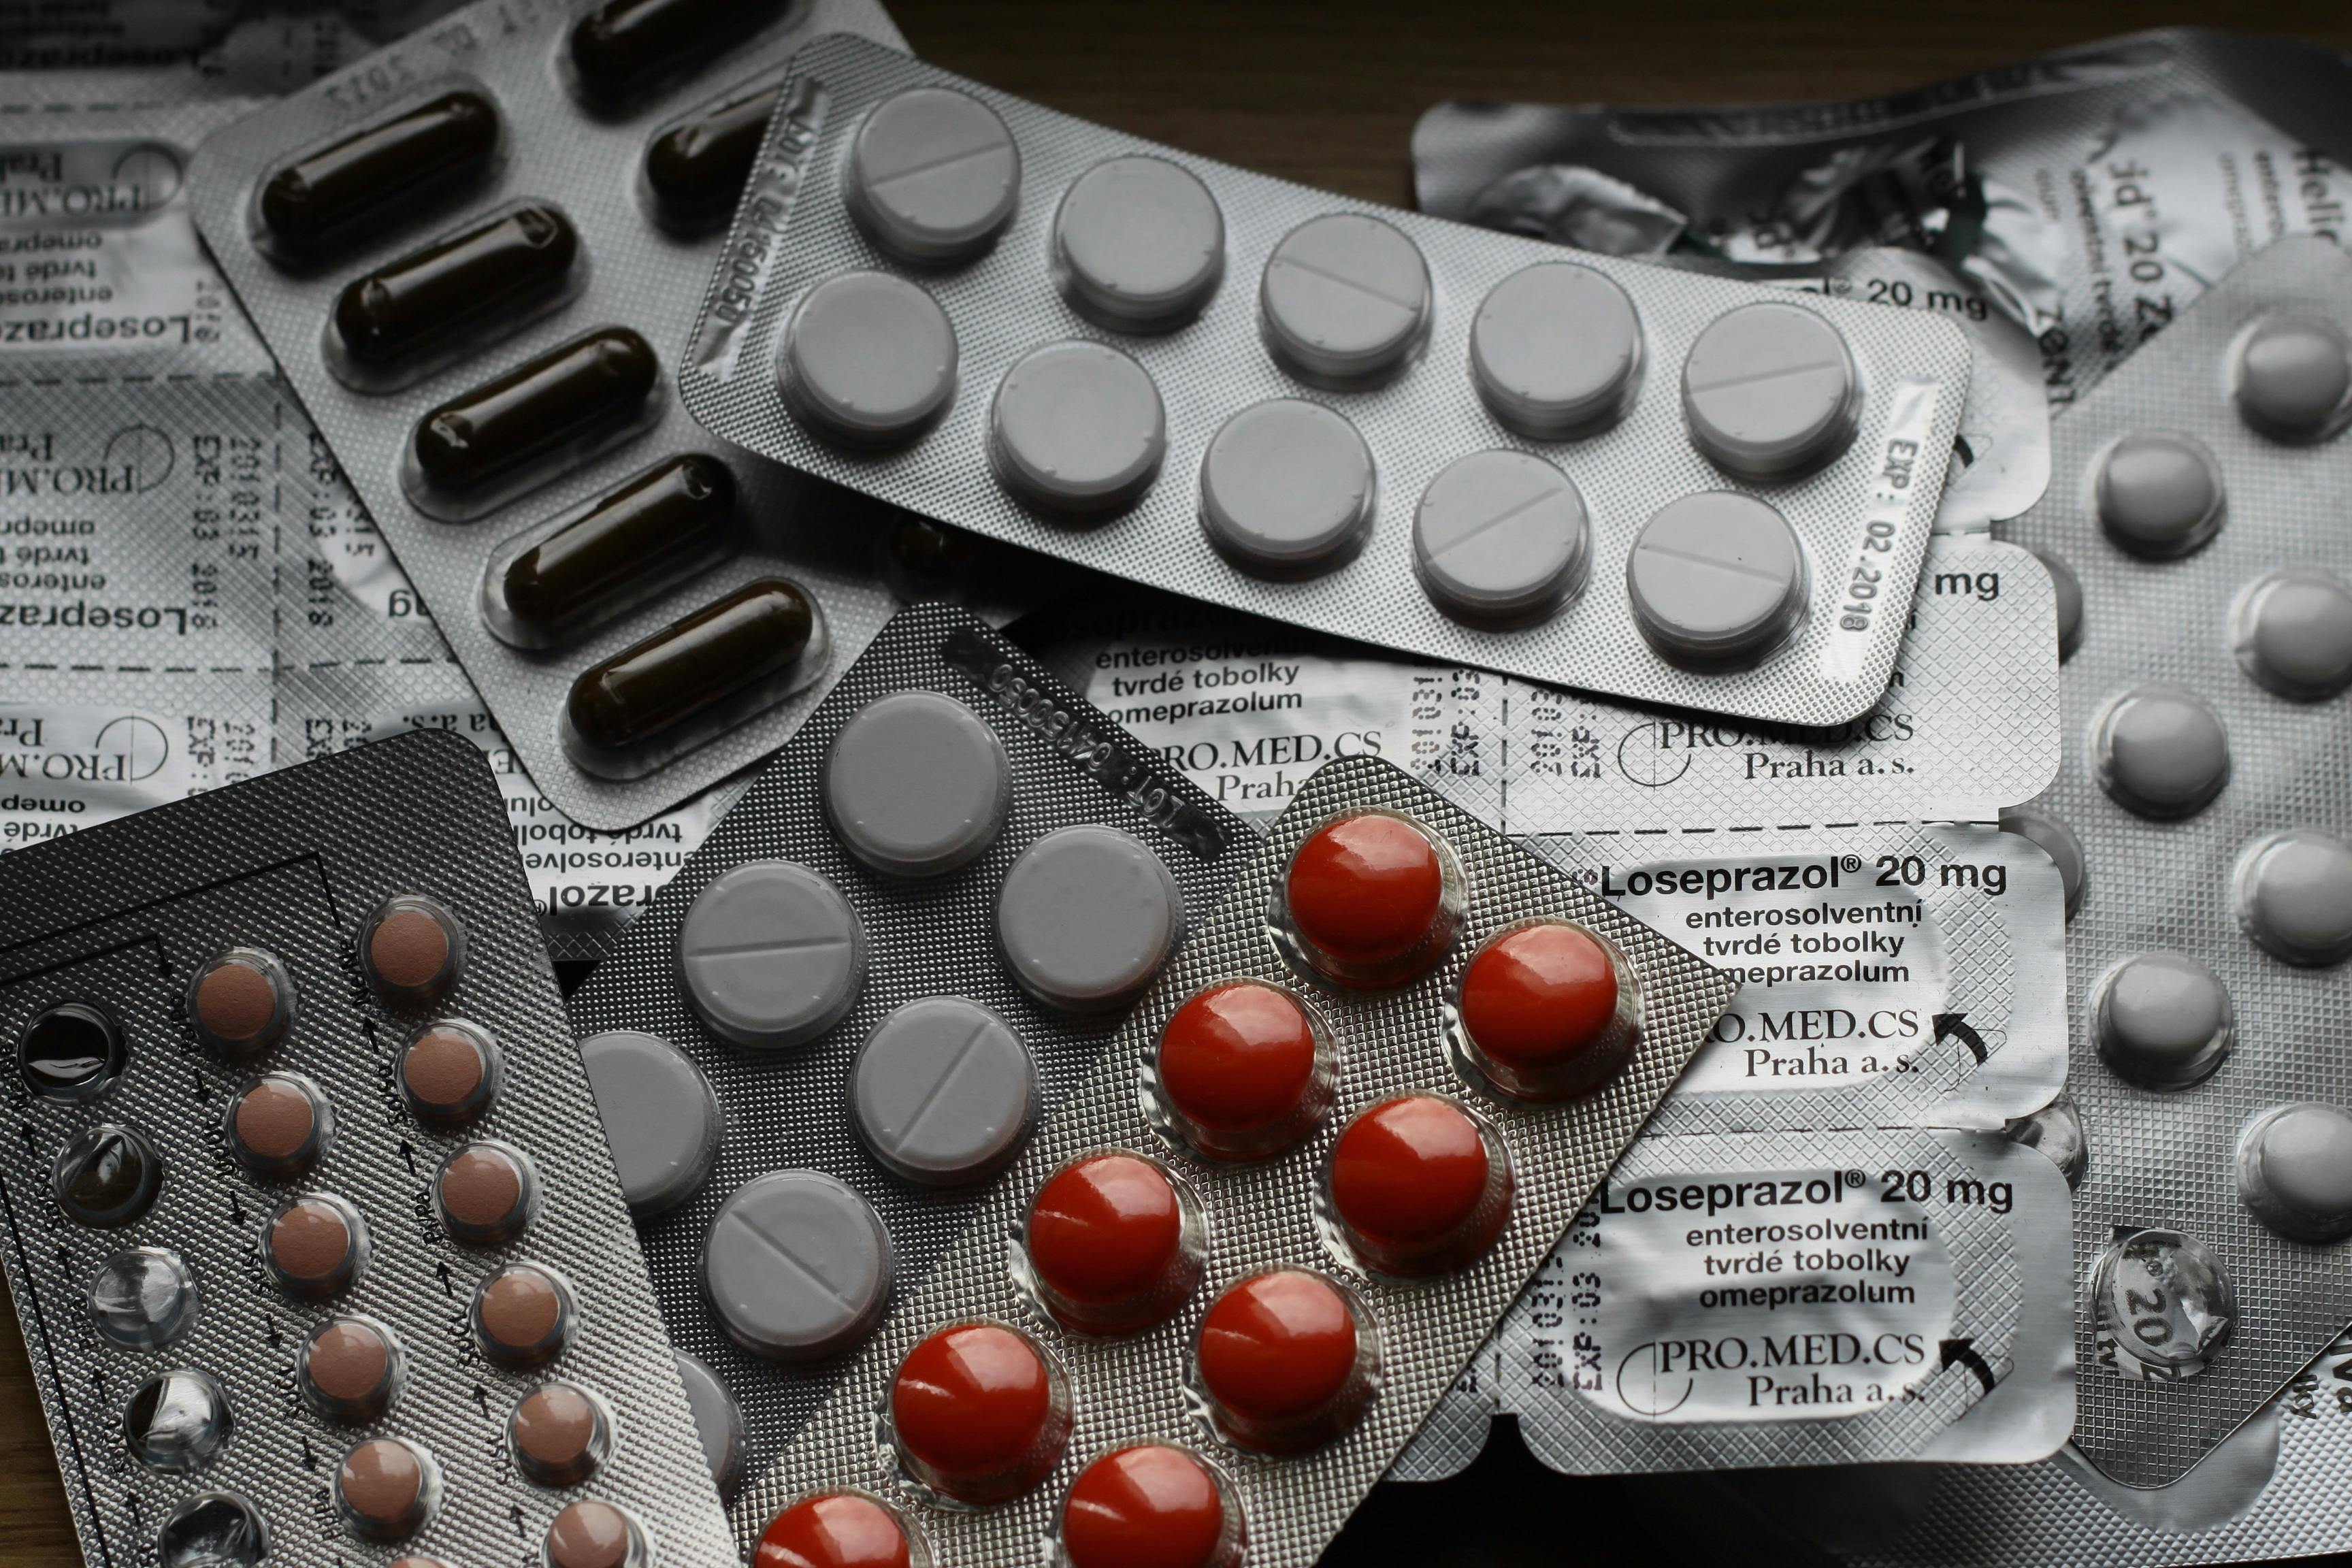 Drug Photos, Download The BEST Free Drug Stock Photos & HD Images